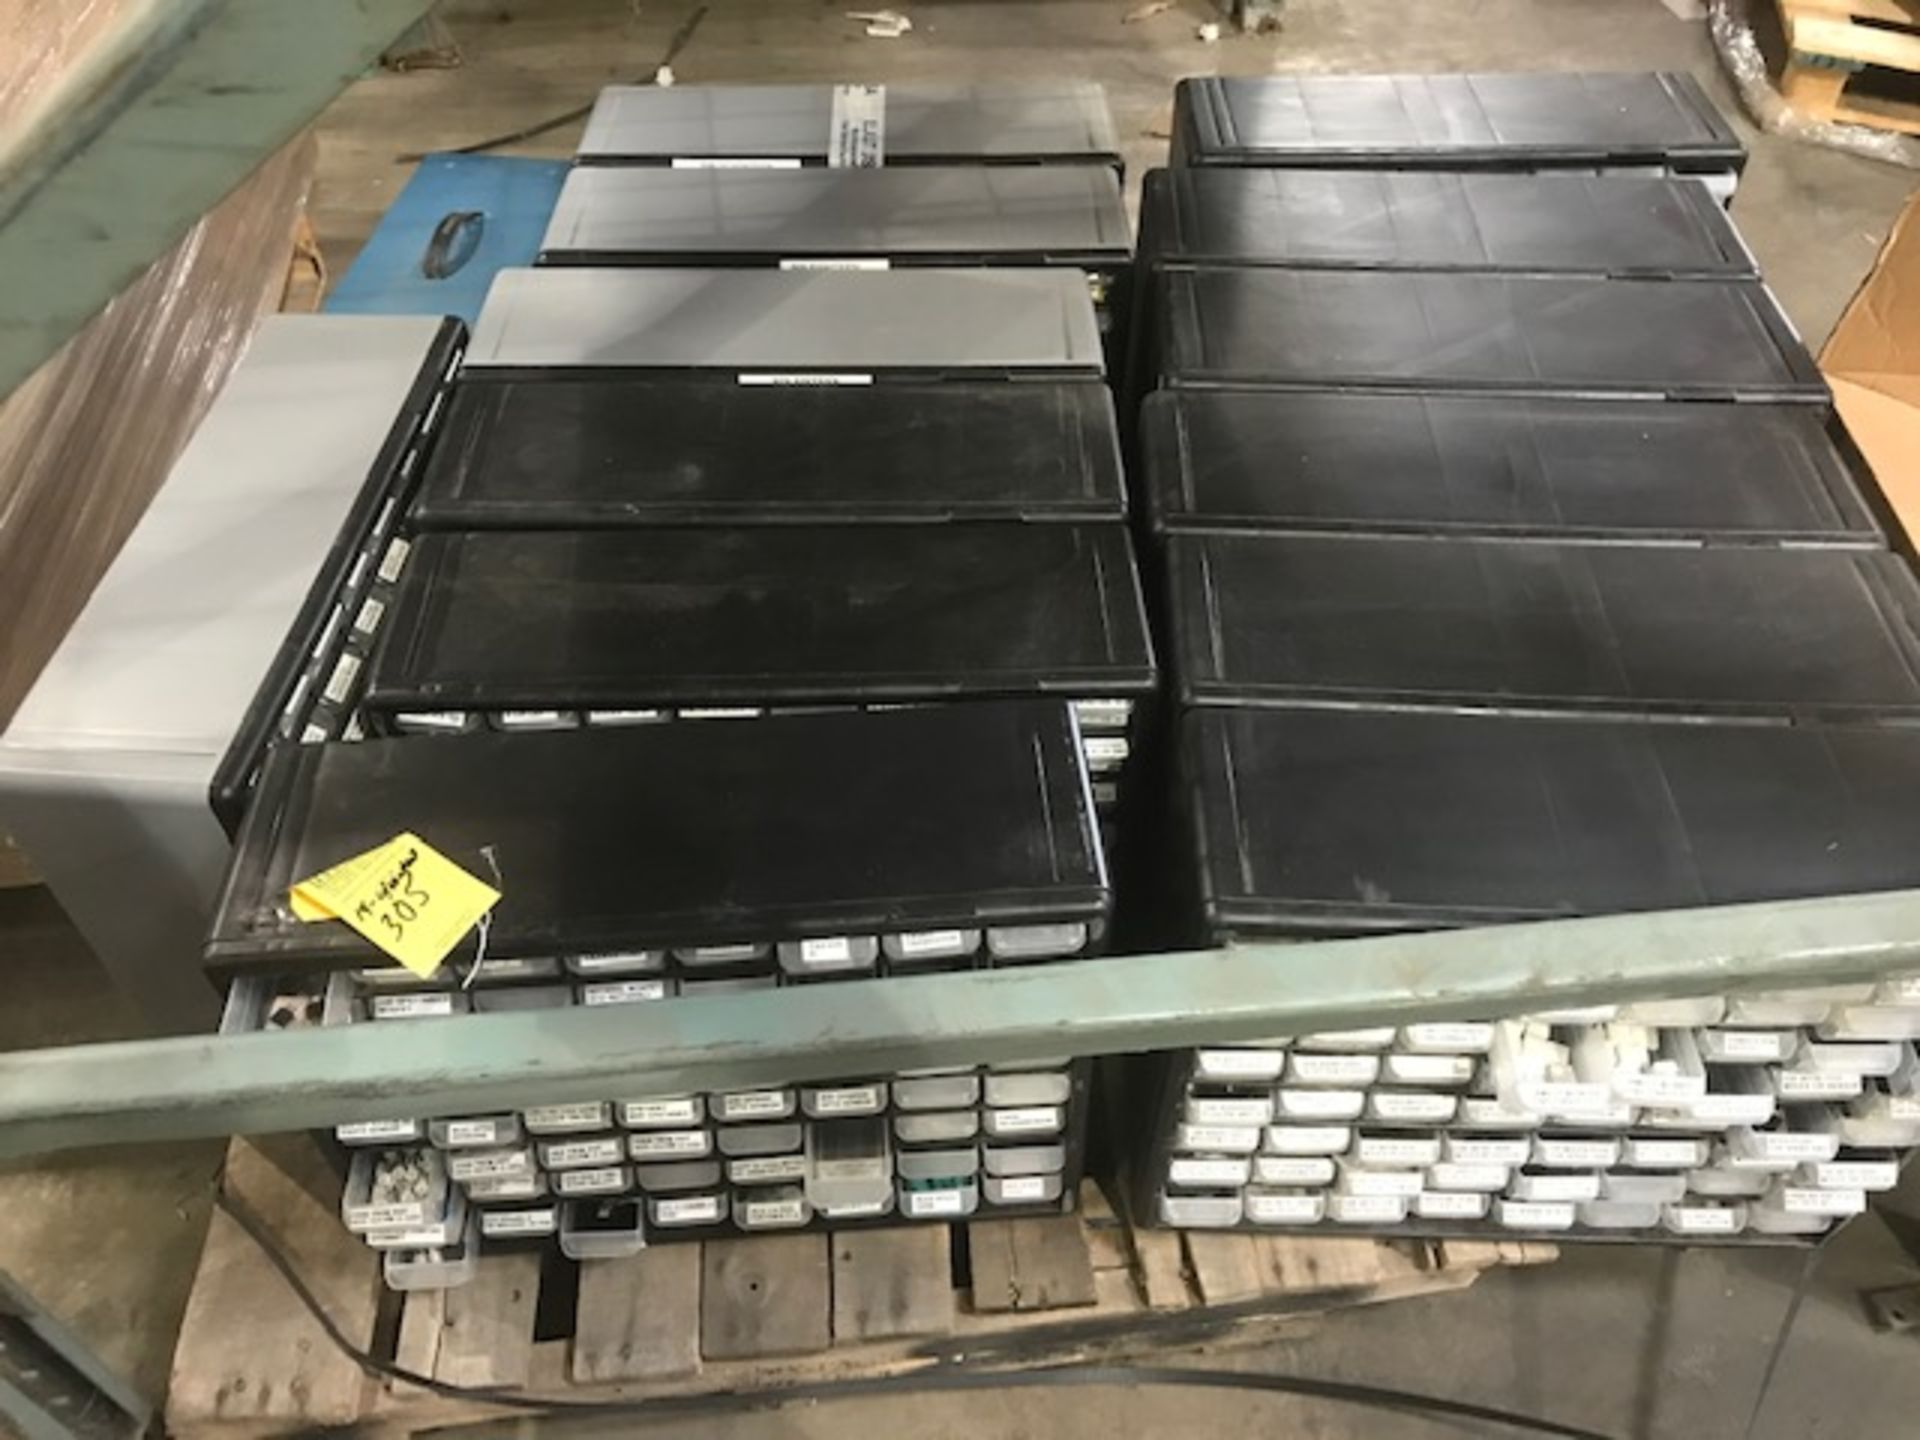 PARTS BINS WITH CONTENTS - ELECTRONIC PARTS